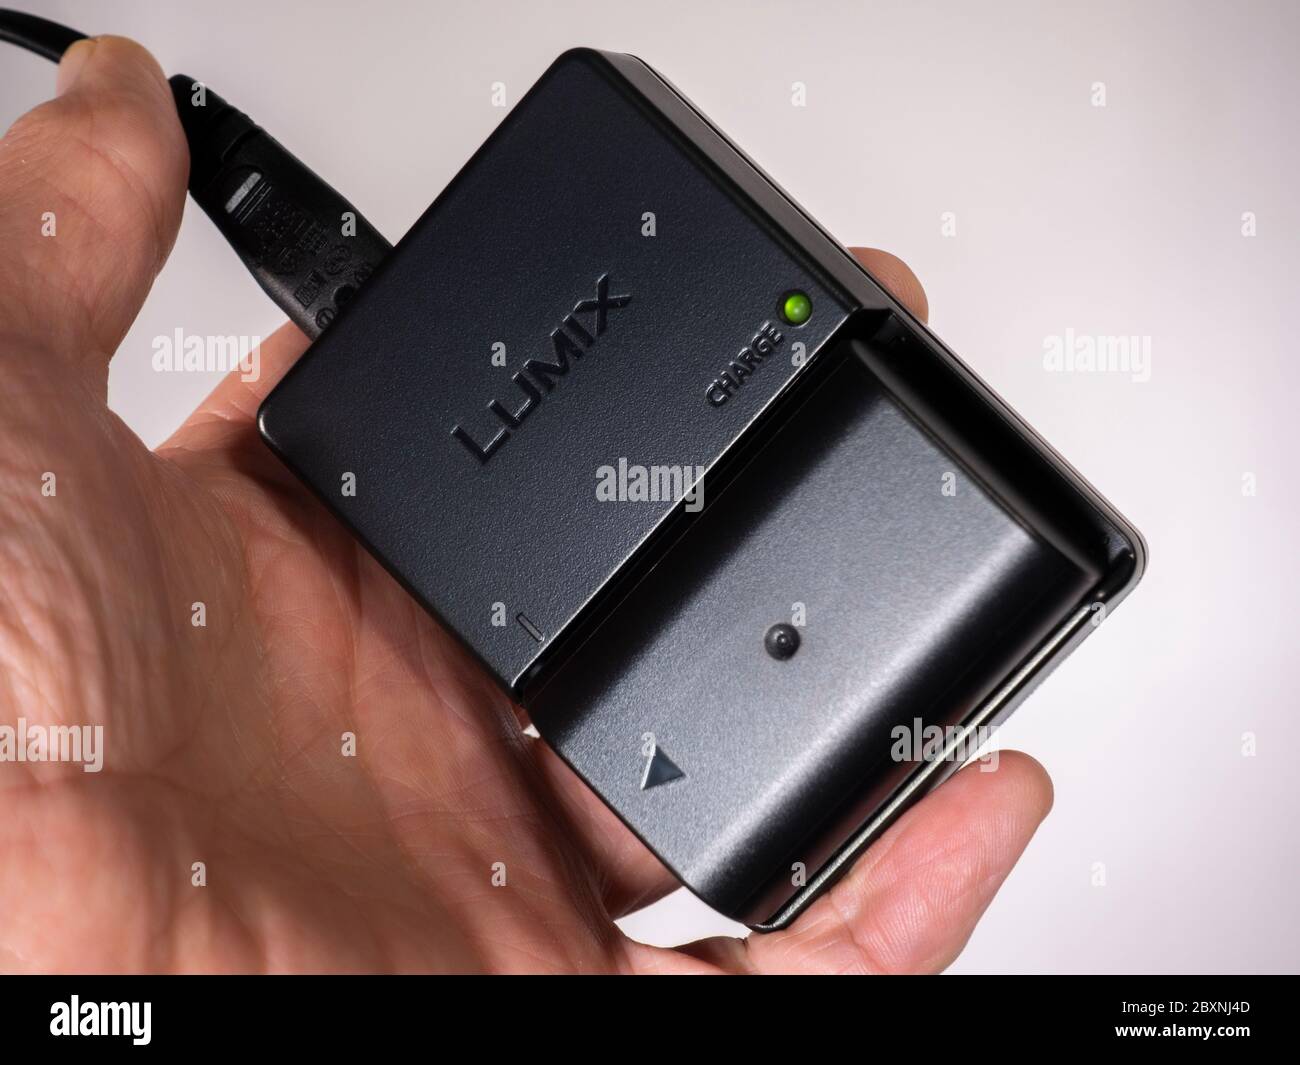 Isolated shot of a man's hand holding a Panasonic Lumix camera battery  charger, with the green charging light activated, and camera battery  inserted Stock Photo - Alamy